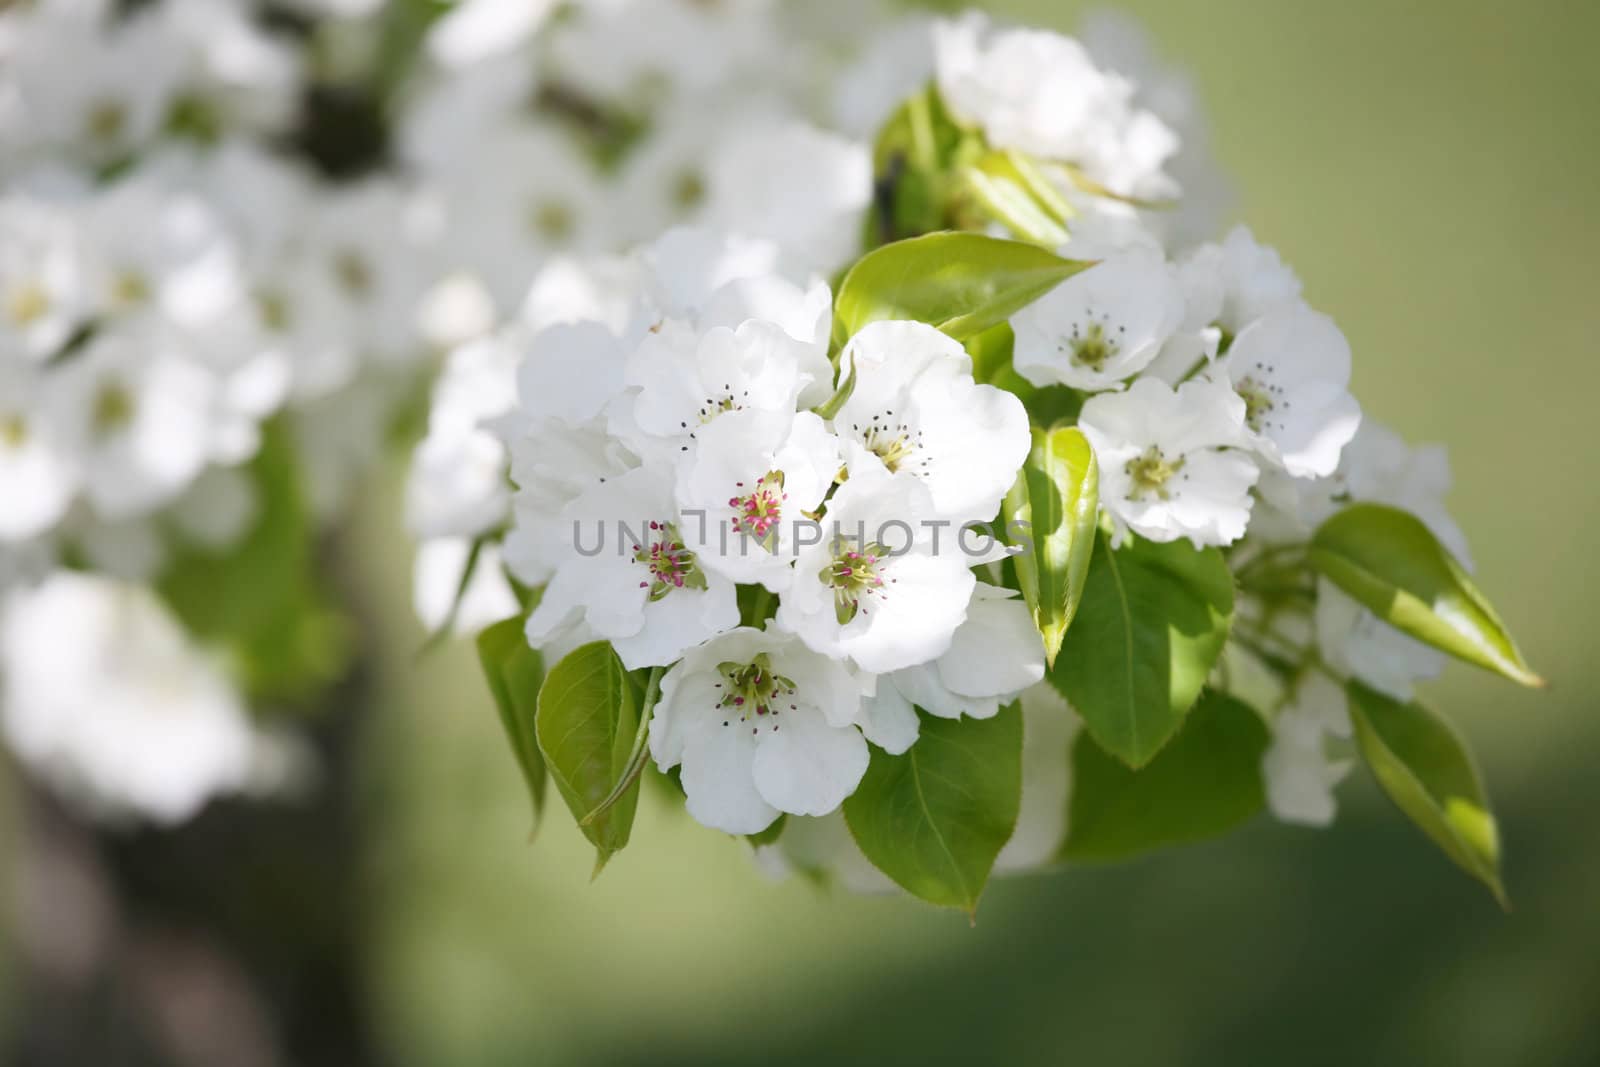 Delicate apple or plum blossoms by jarenwicklund